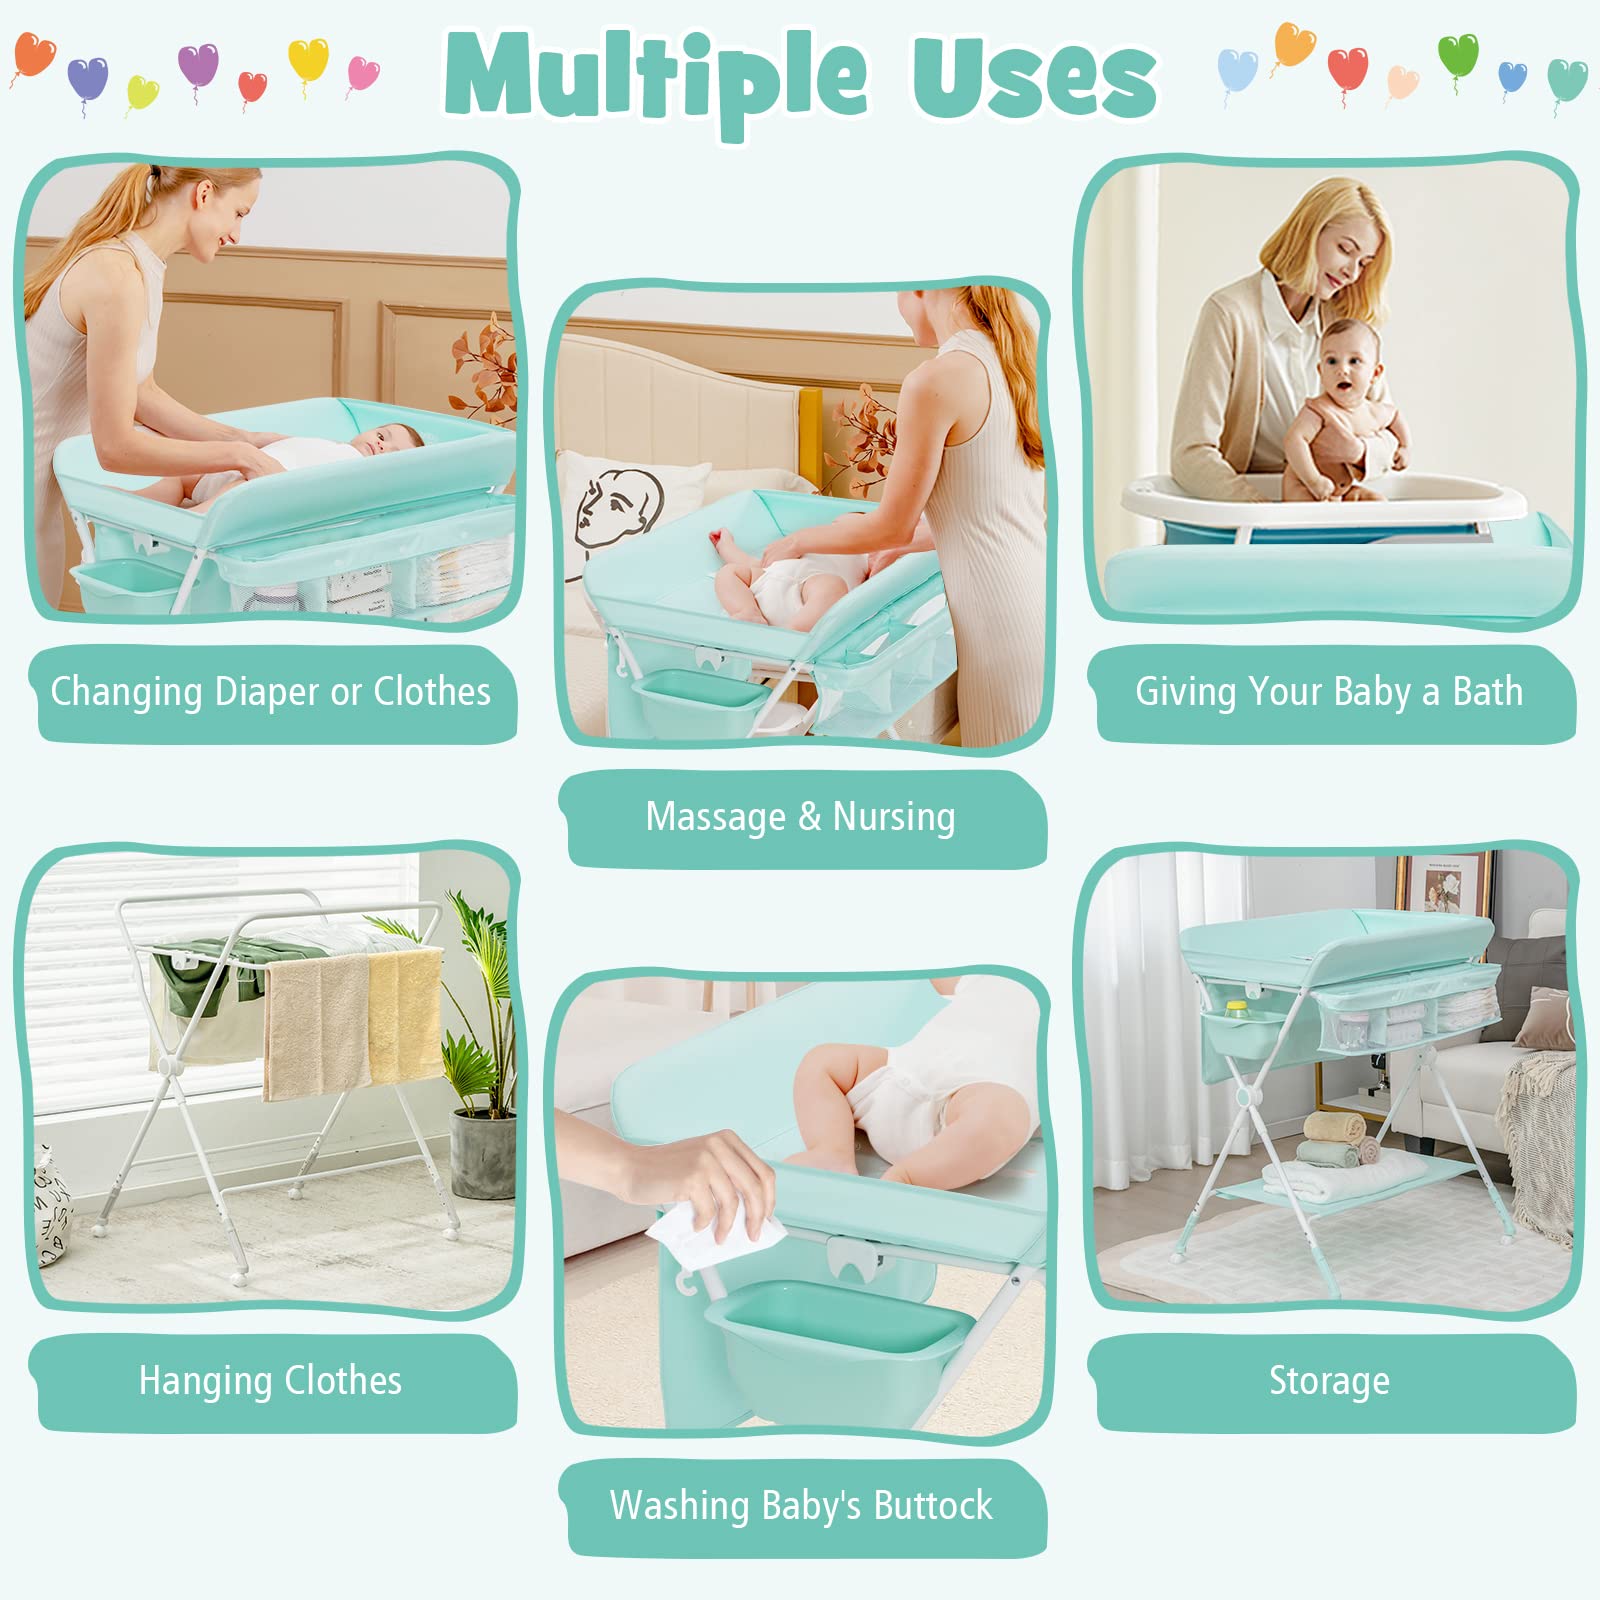 Costzon Baby Changing Table